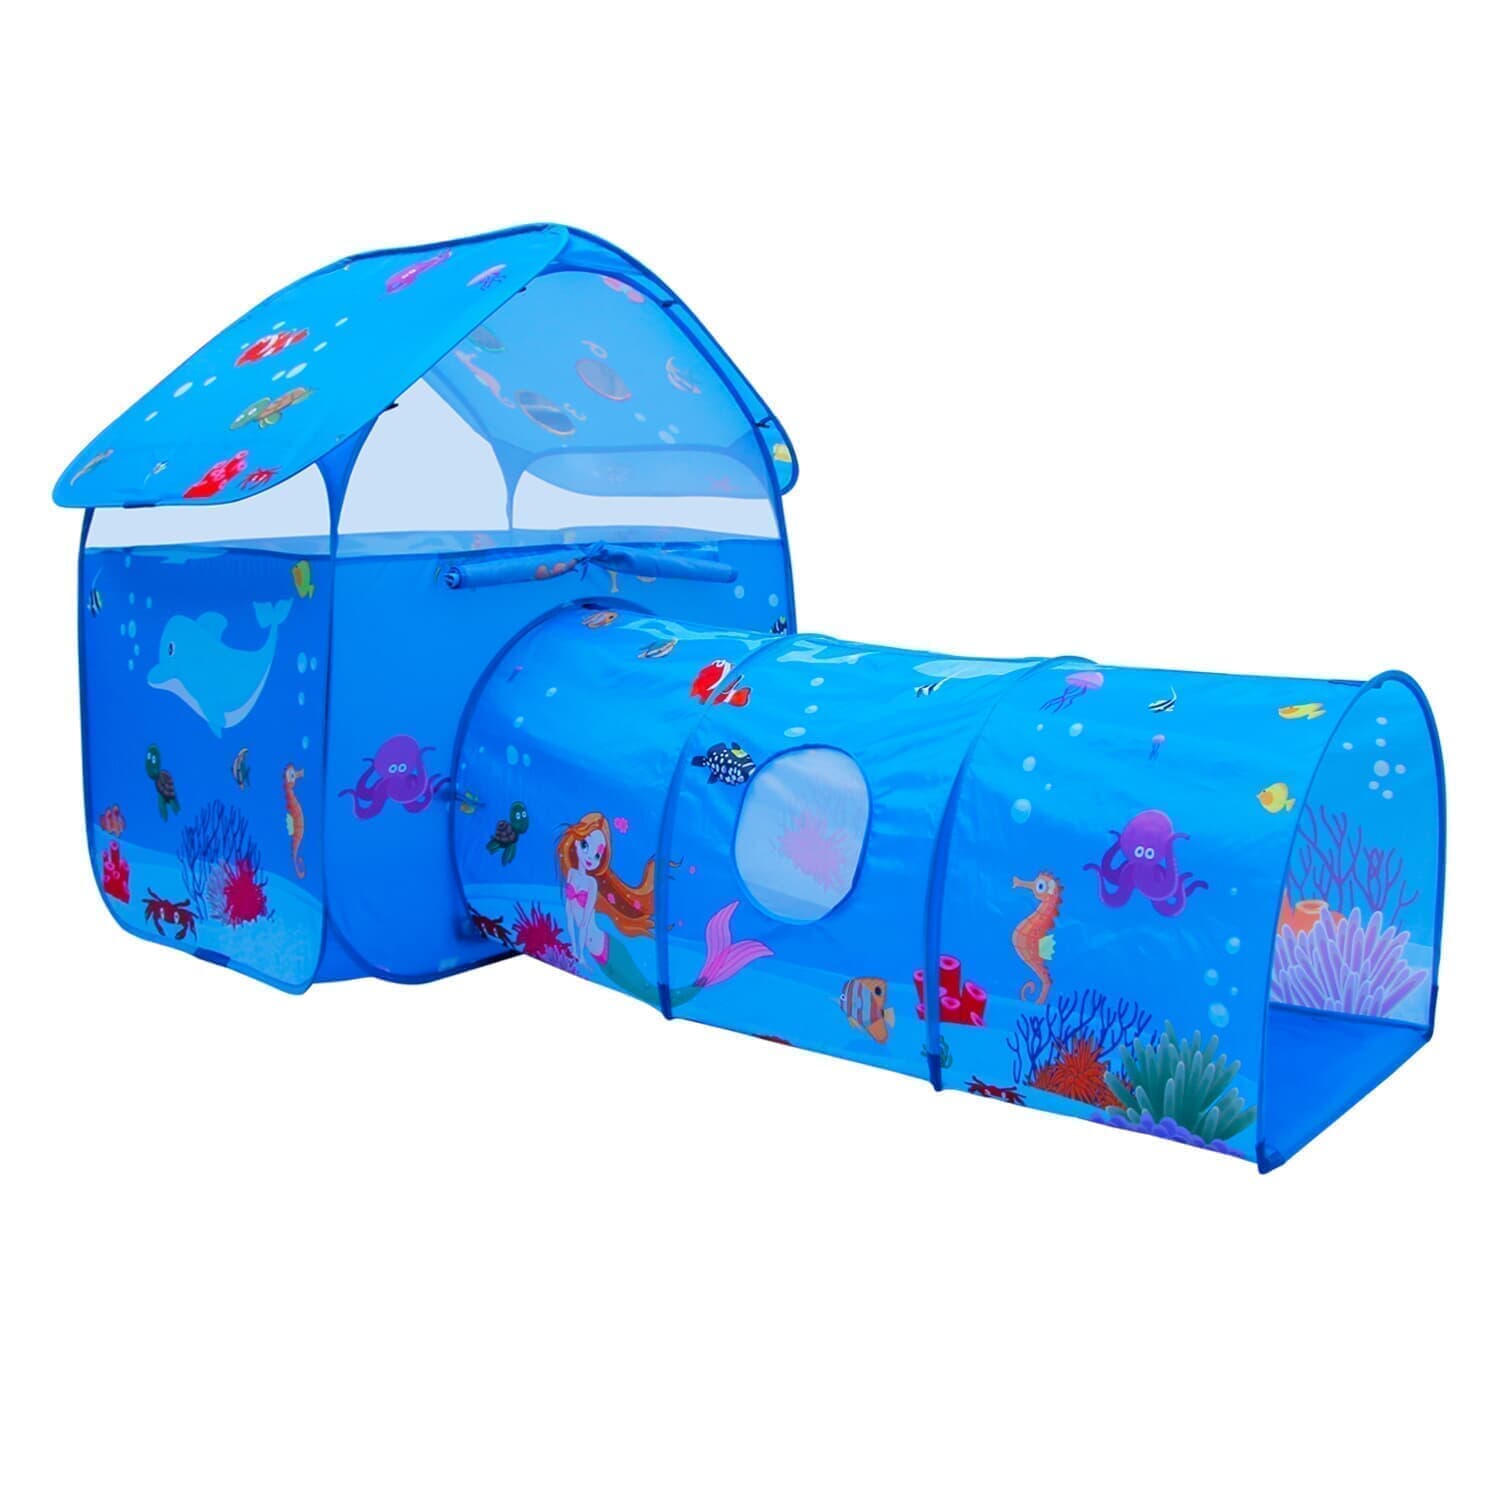 Homfu Play Tent for Kids Playhouse for Children Boys Popup Tent (Ocean Blue) Homfu 2 in 1 kids play tent with tunnel outdoor indoor playhouse kids play tent,Toddler Tunnel